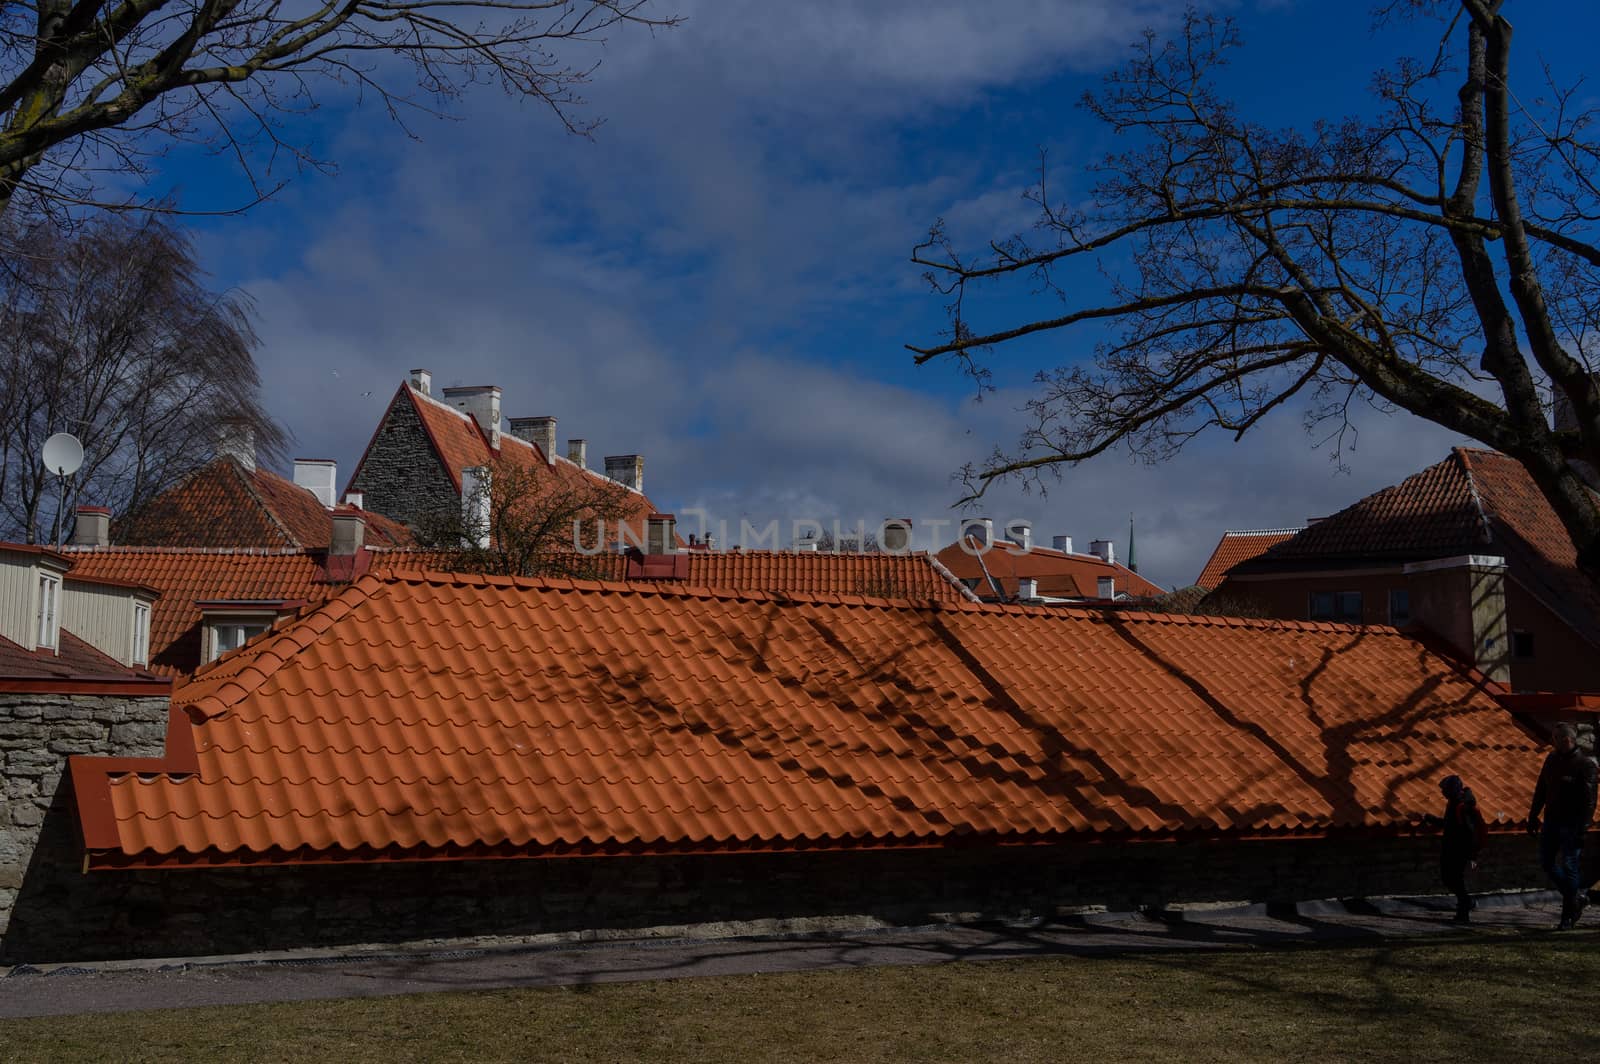 Landmarks of the Estonian capital by fifg